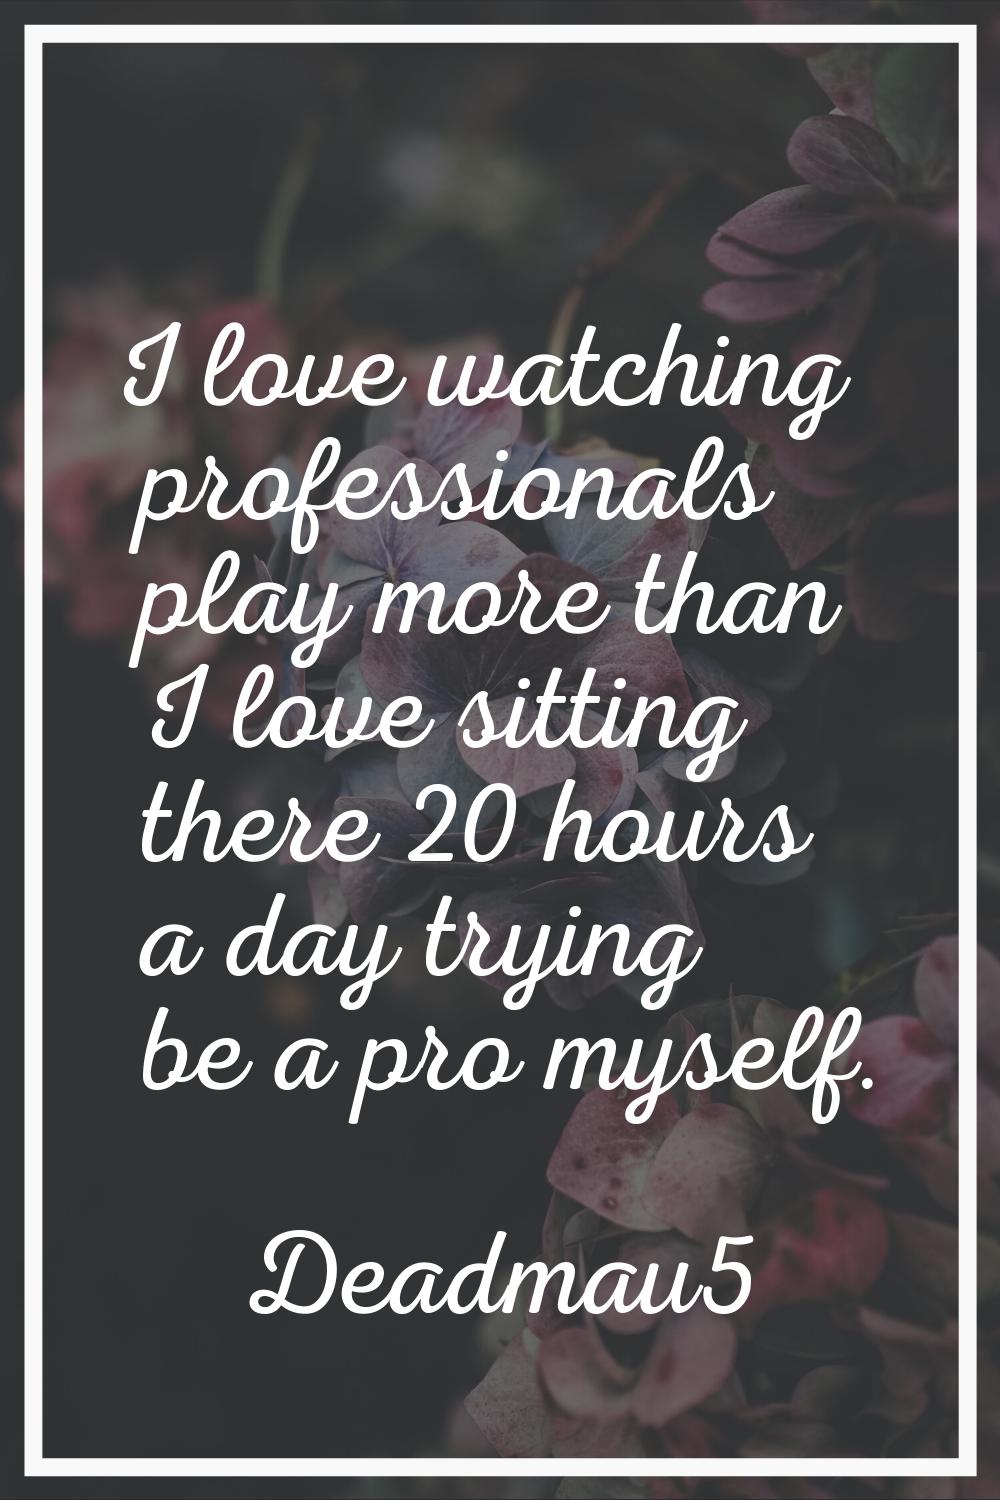 I love watching professionals play more than I love sitting there 20 hours a day trying be a pro my